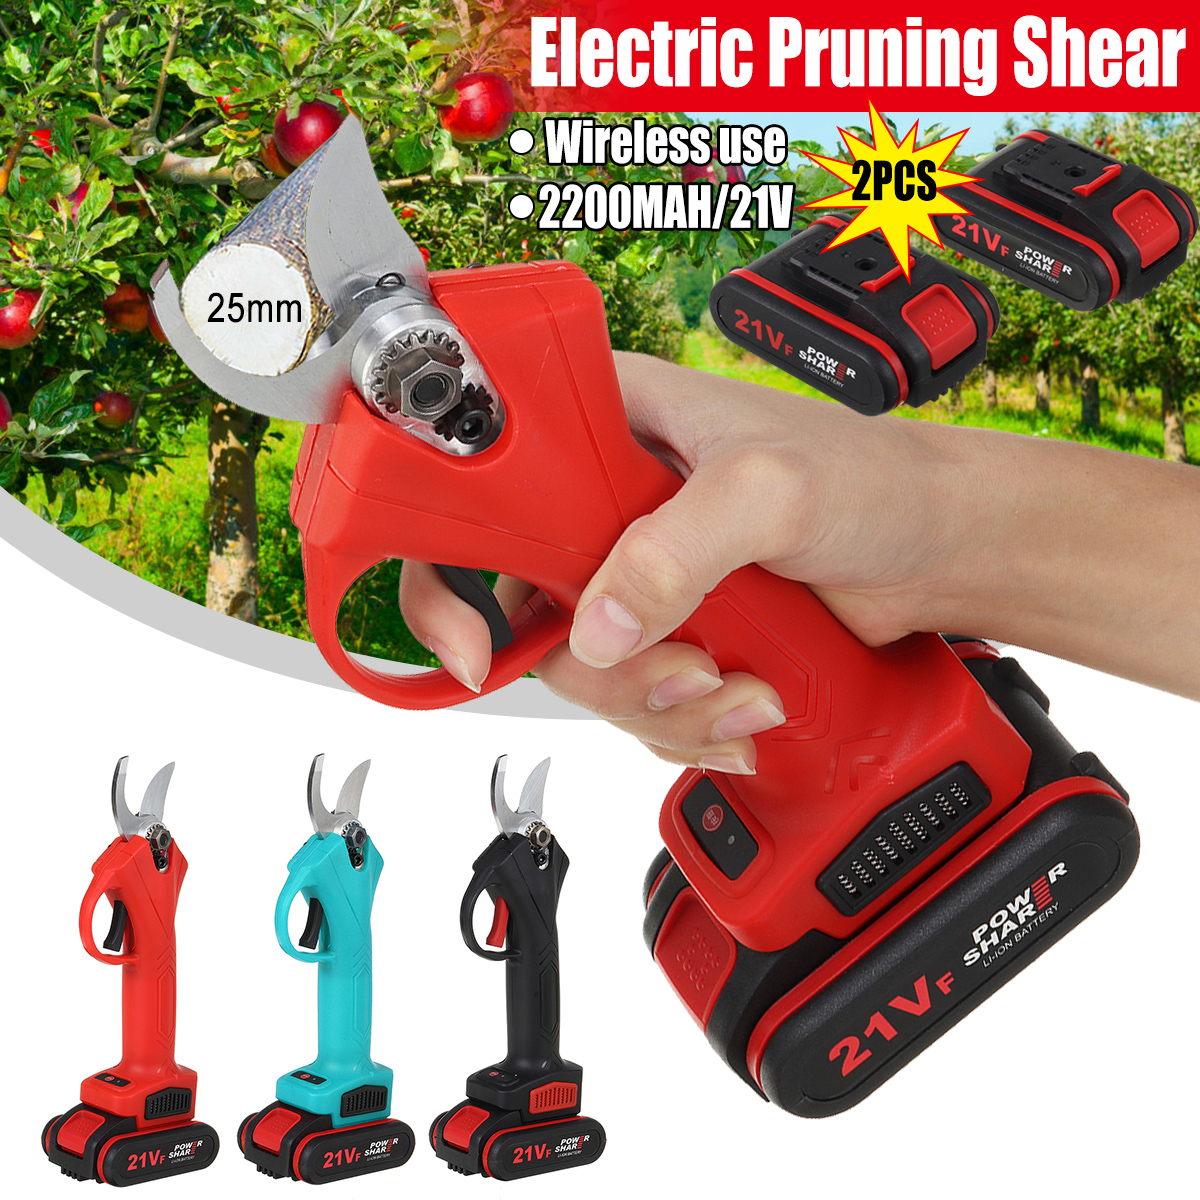 21V-Wireless-25mm-Rechargeable-Electric-Scissors-Branch-Pruning-Shear-Tree-Cutting-Tools-W-2-Battery-1749247-2